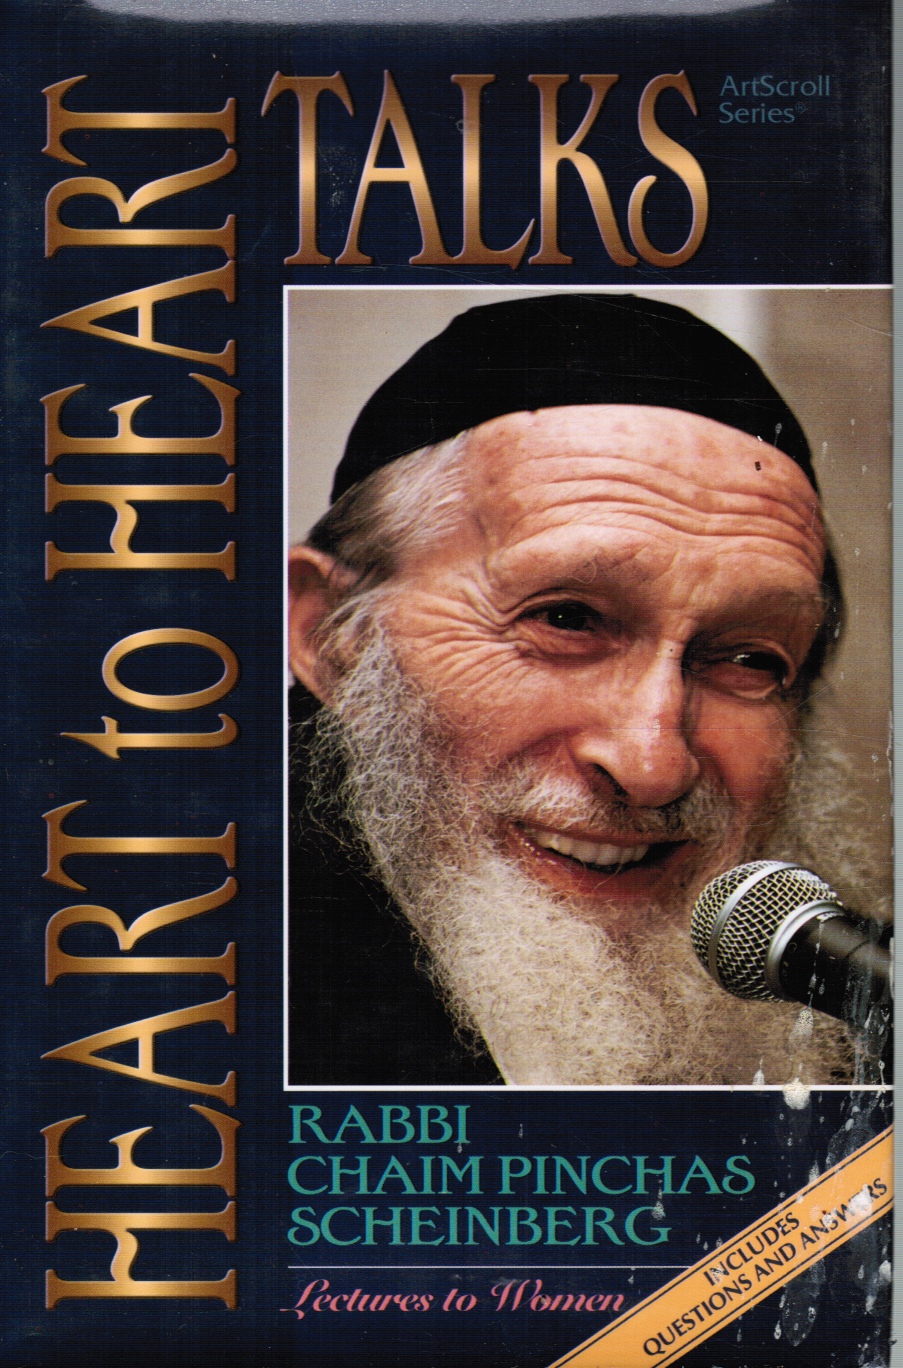 FINKELSTEIN, MOSHE (COMPILED AND EDITED BY) ; A. RAPPAPORT (ASSISTED BY) - Heart to Heart Talks: Rabbi Chaim Pinchas Scheinberg : Lectures to Women